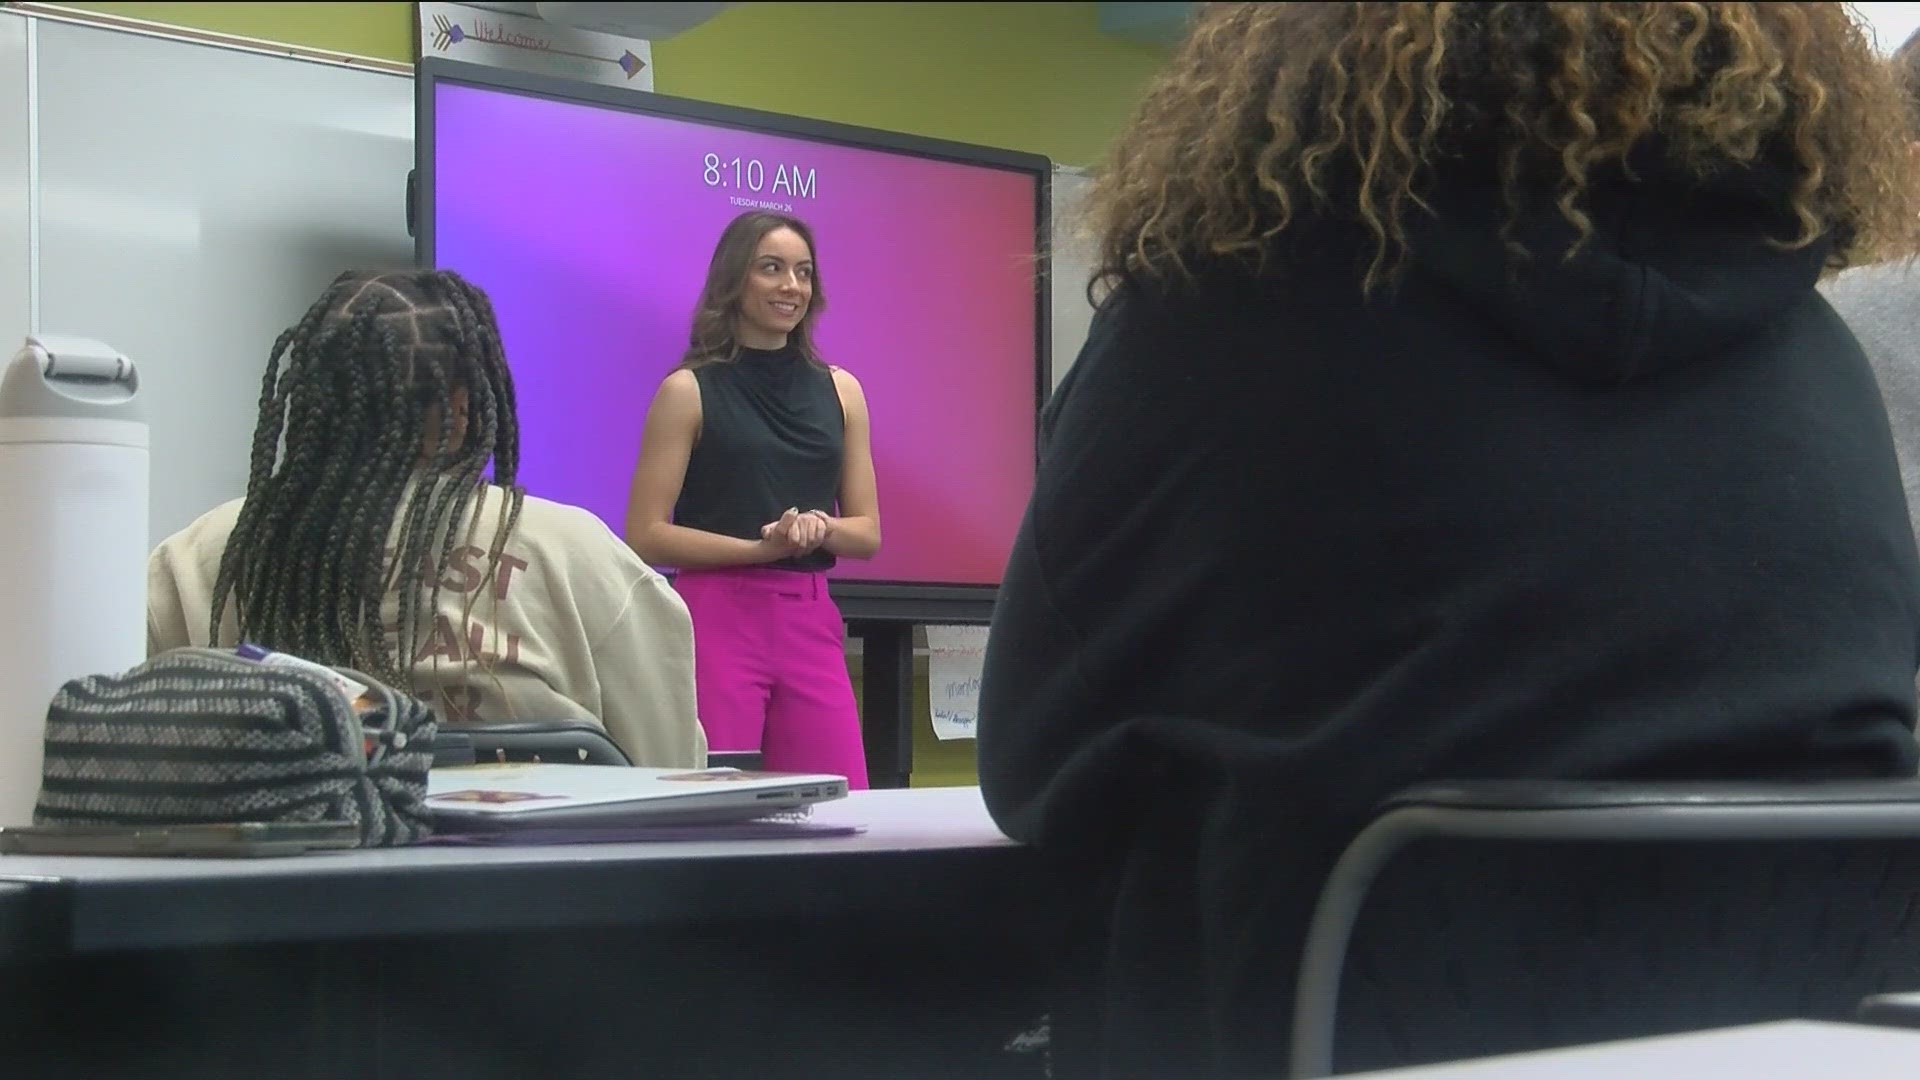 WTOL 11's Noelle Blumel talked to juniors and seniors about her career in journalism and offered advice on how to navigate the transition from high school to college